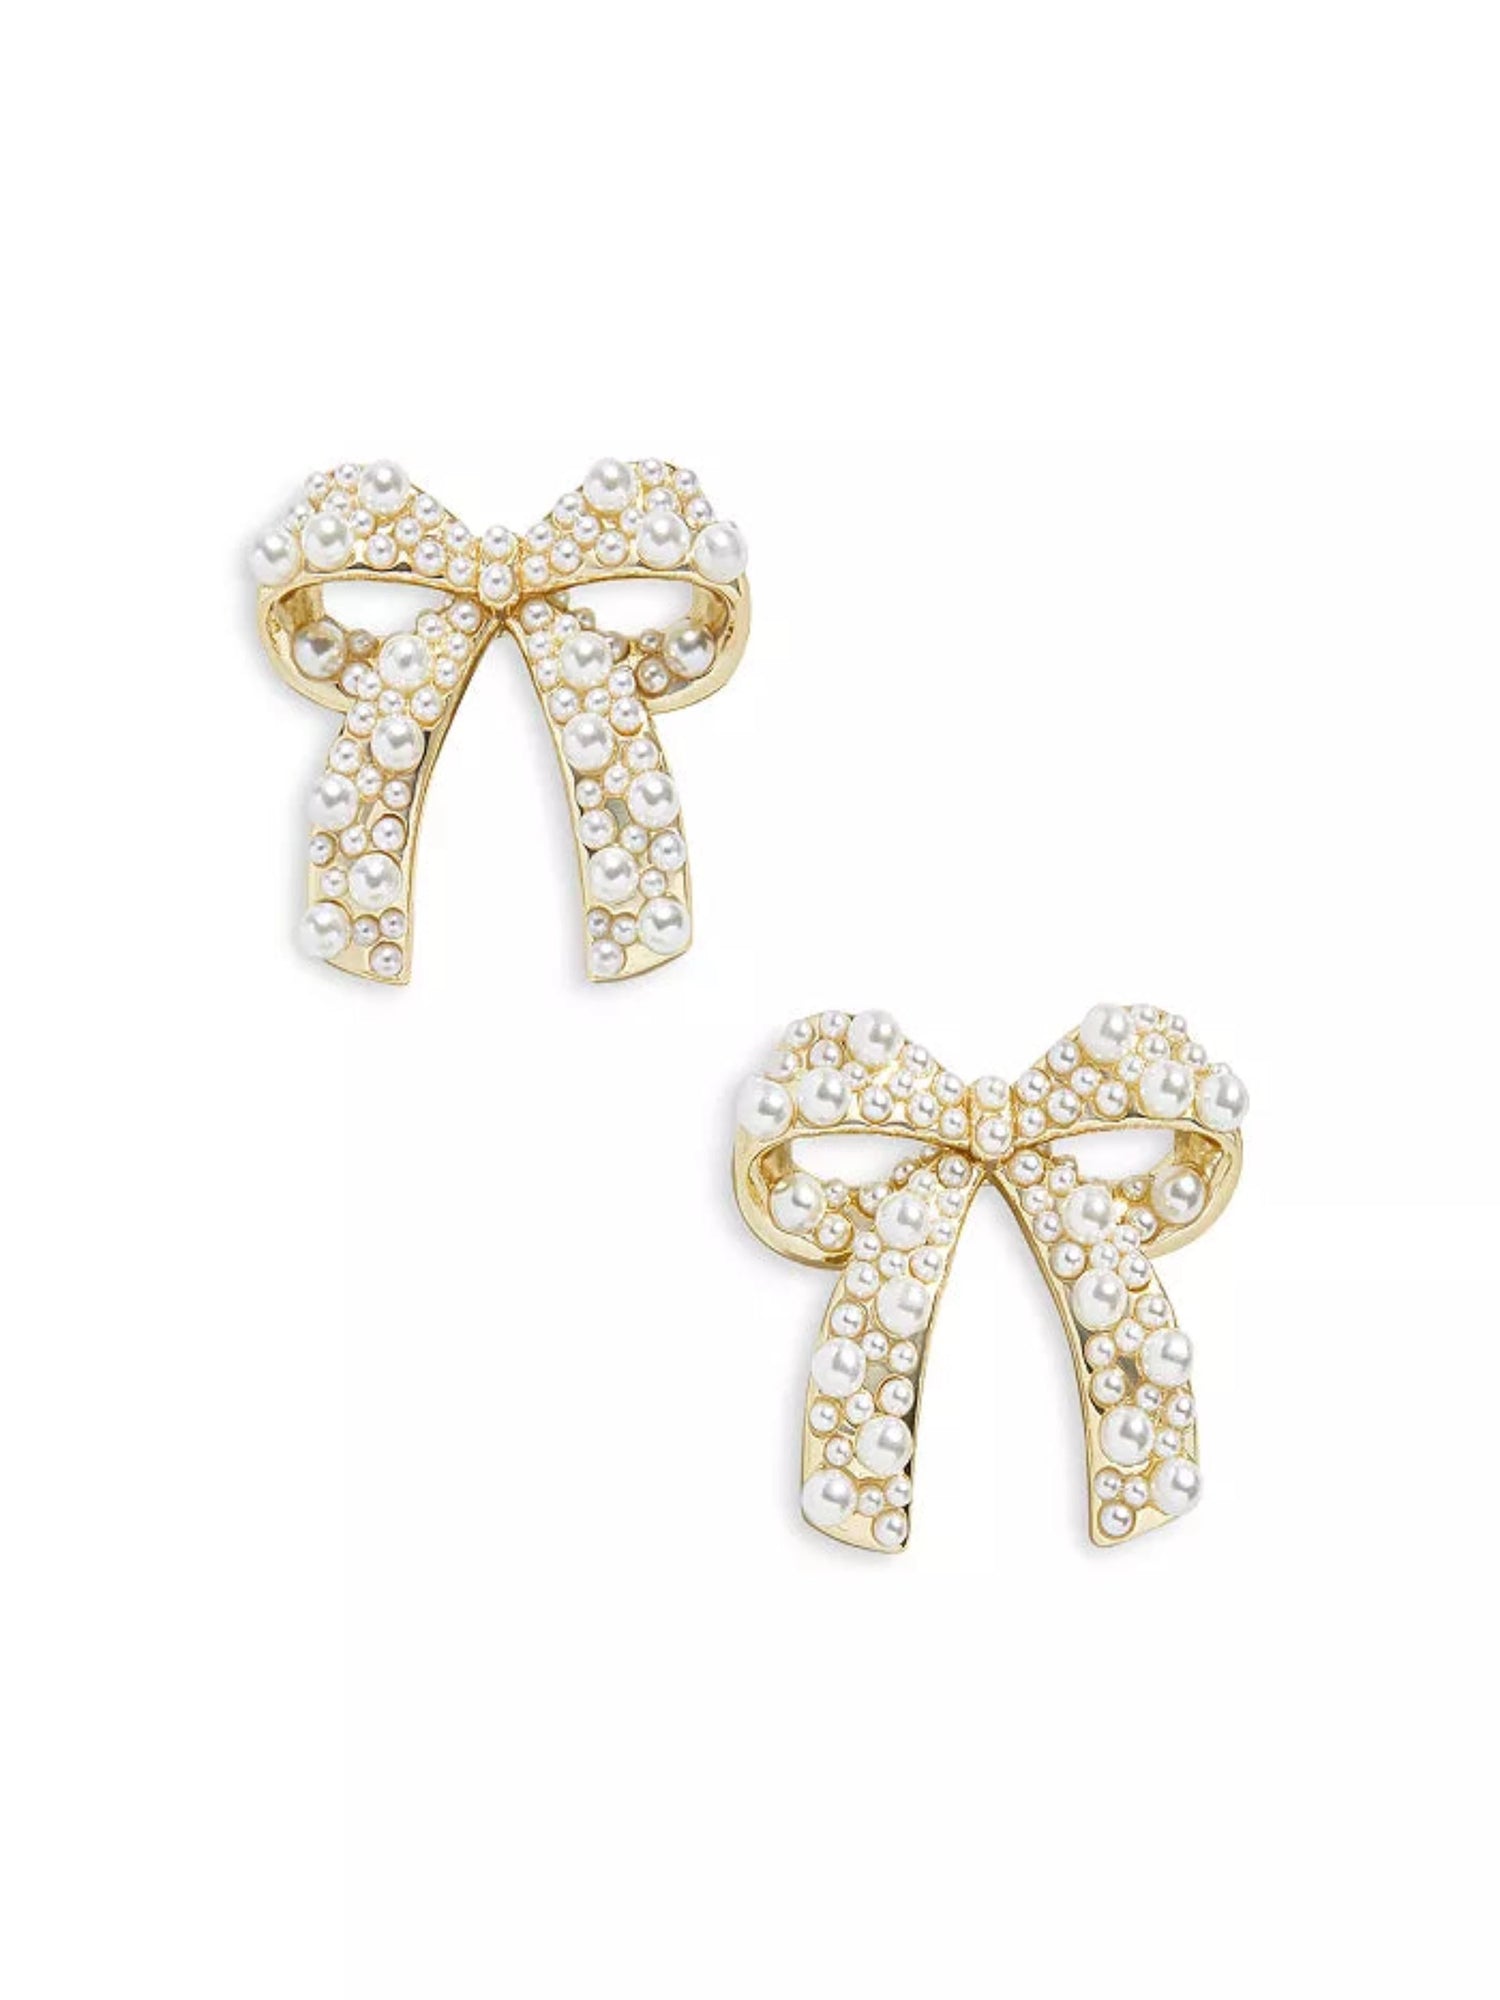 GOLD PEARL BOW STUD EARRING - THE HIP EAGLE BOUTIQUE